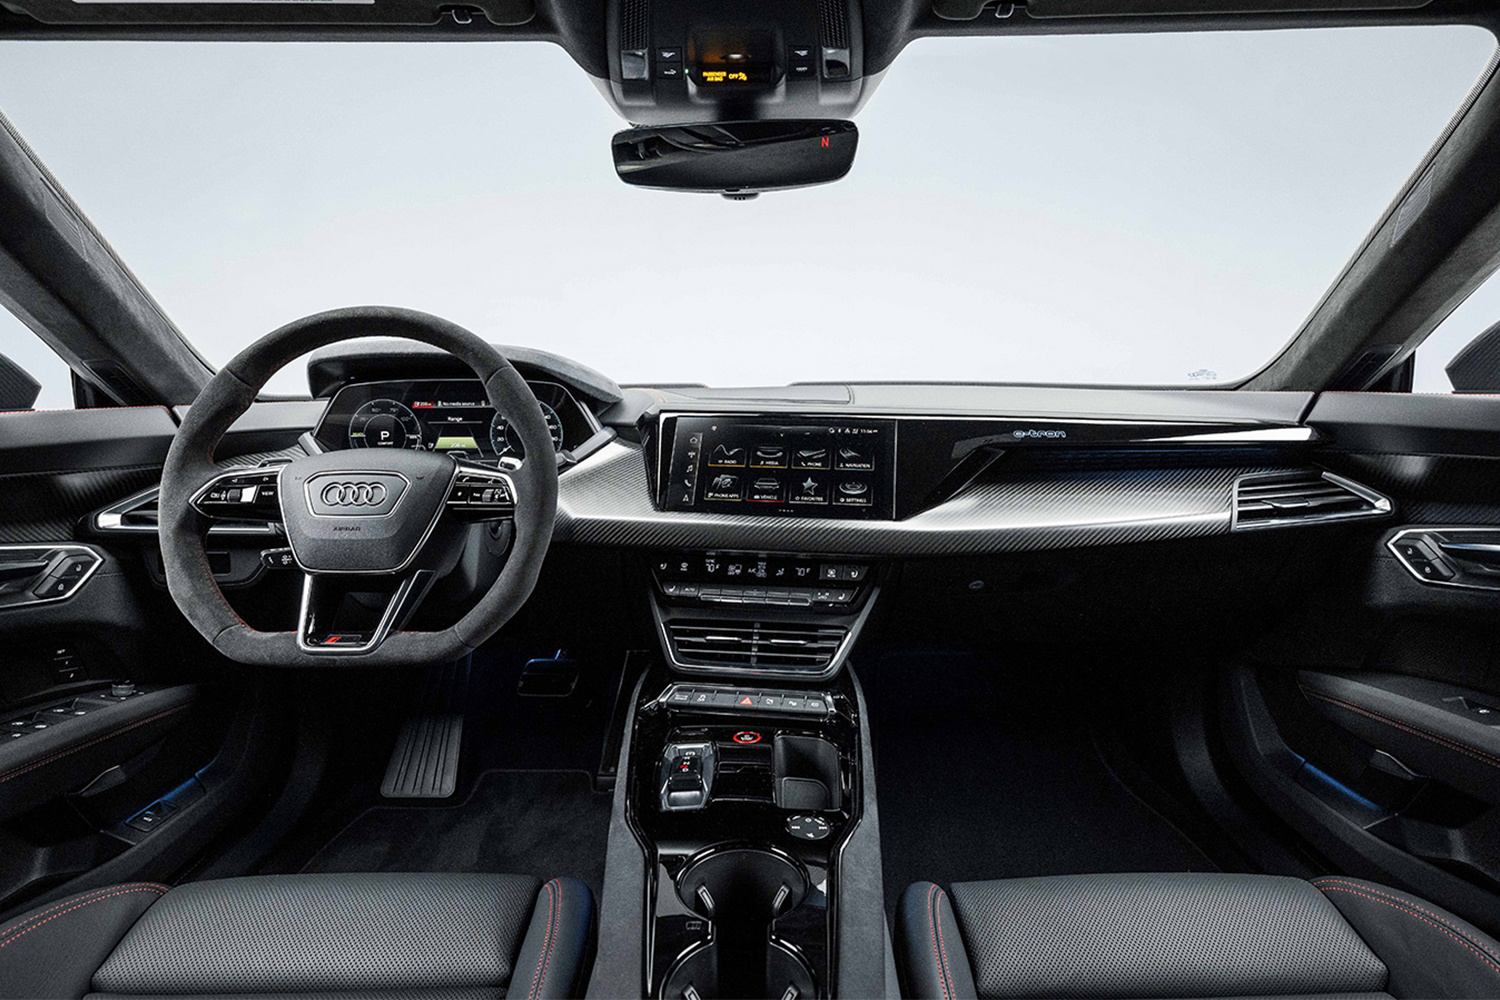 The front seats and dashboard in the 2022 Audi e-tron GT, which is currently being offered up by Omaze